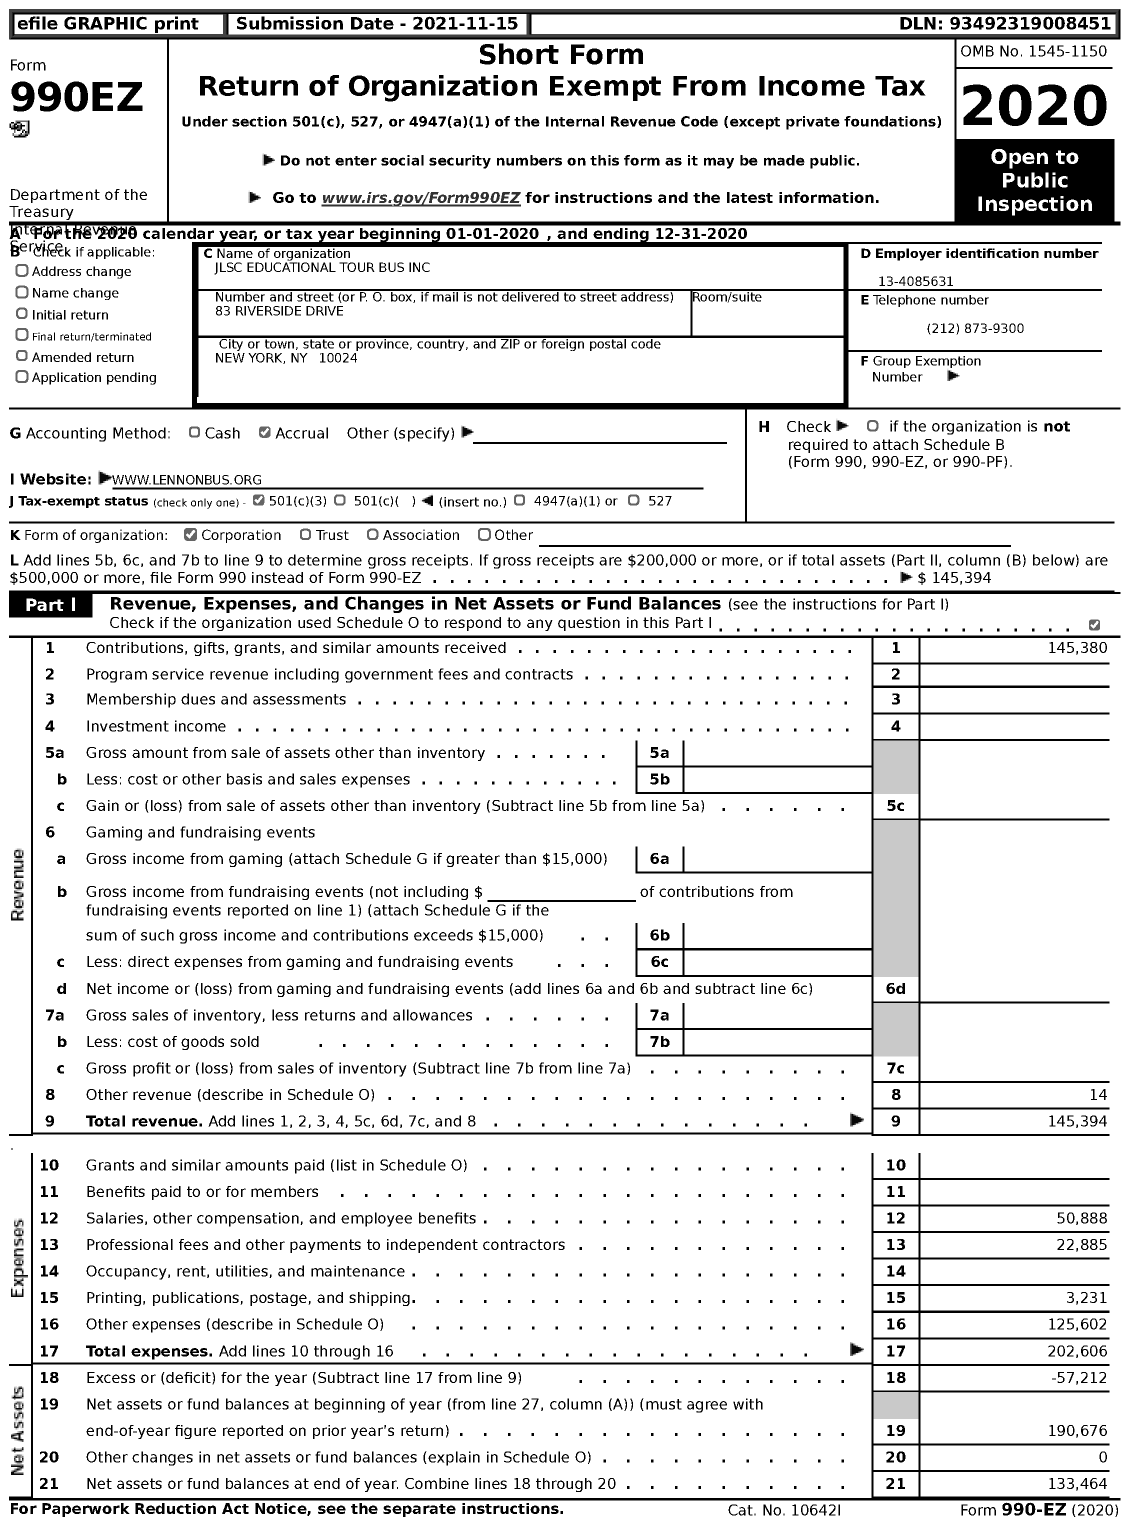 Image of first page of 2020 Form 990EZ for JLSC Educational Tour Bus